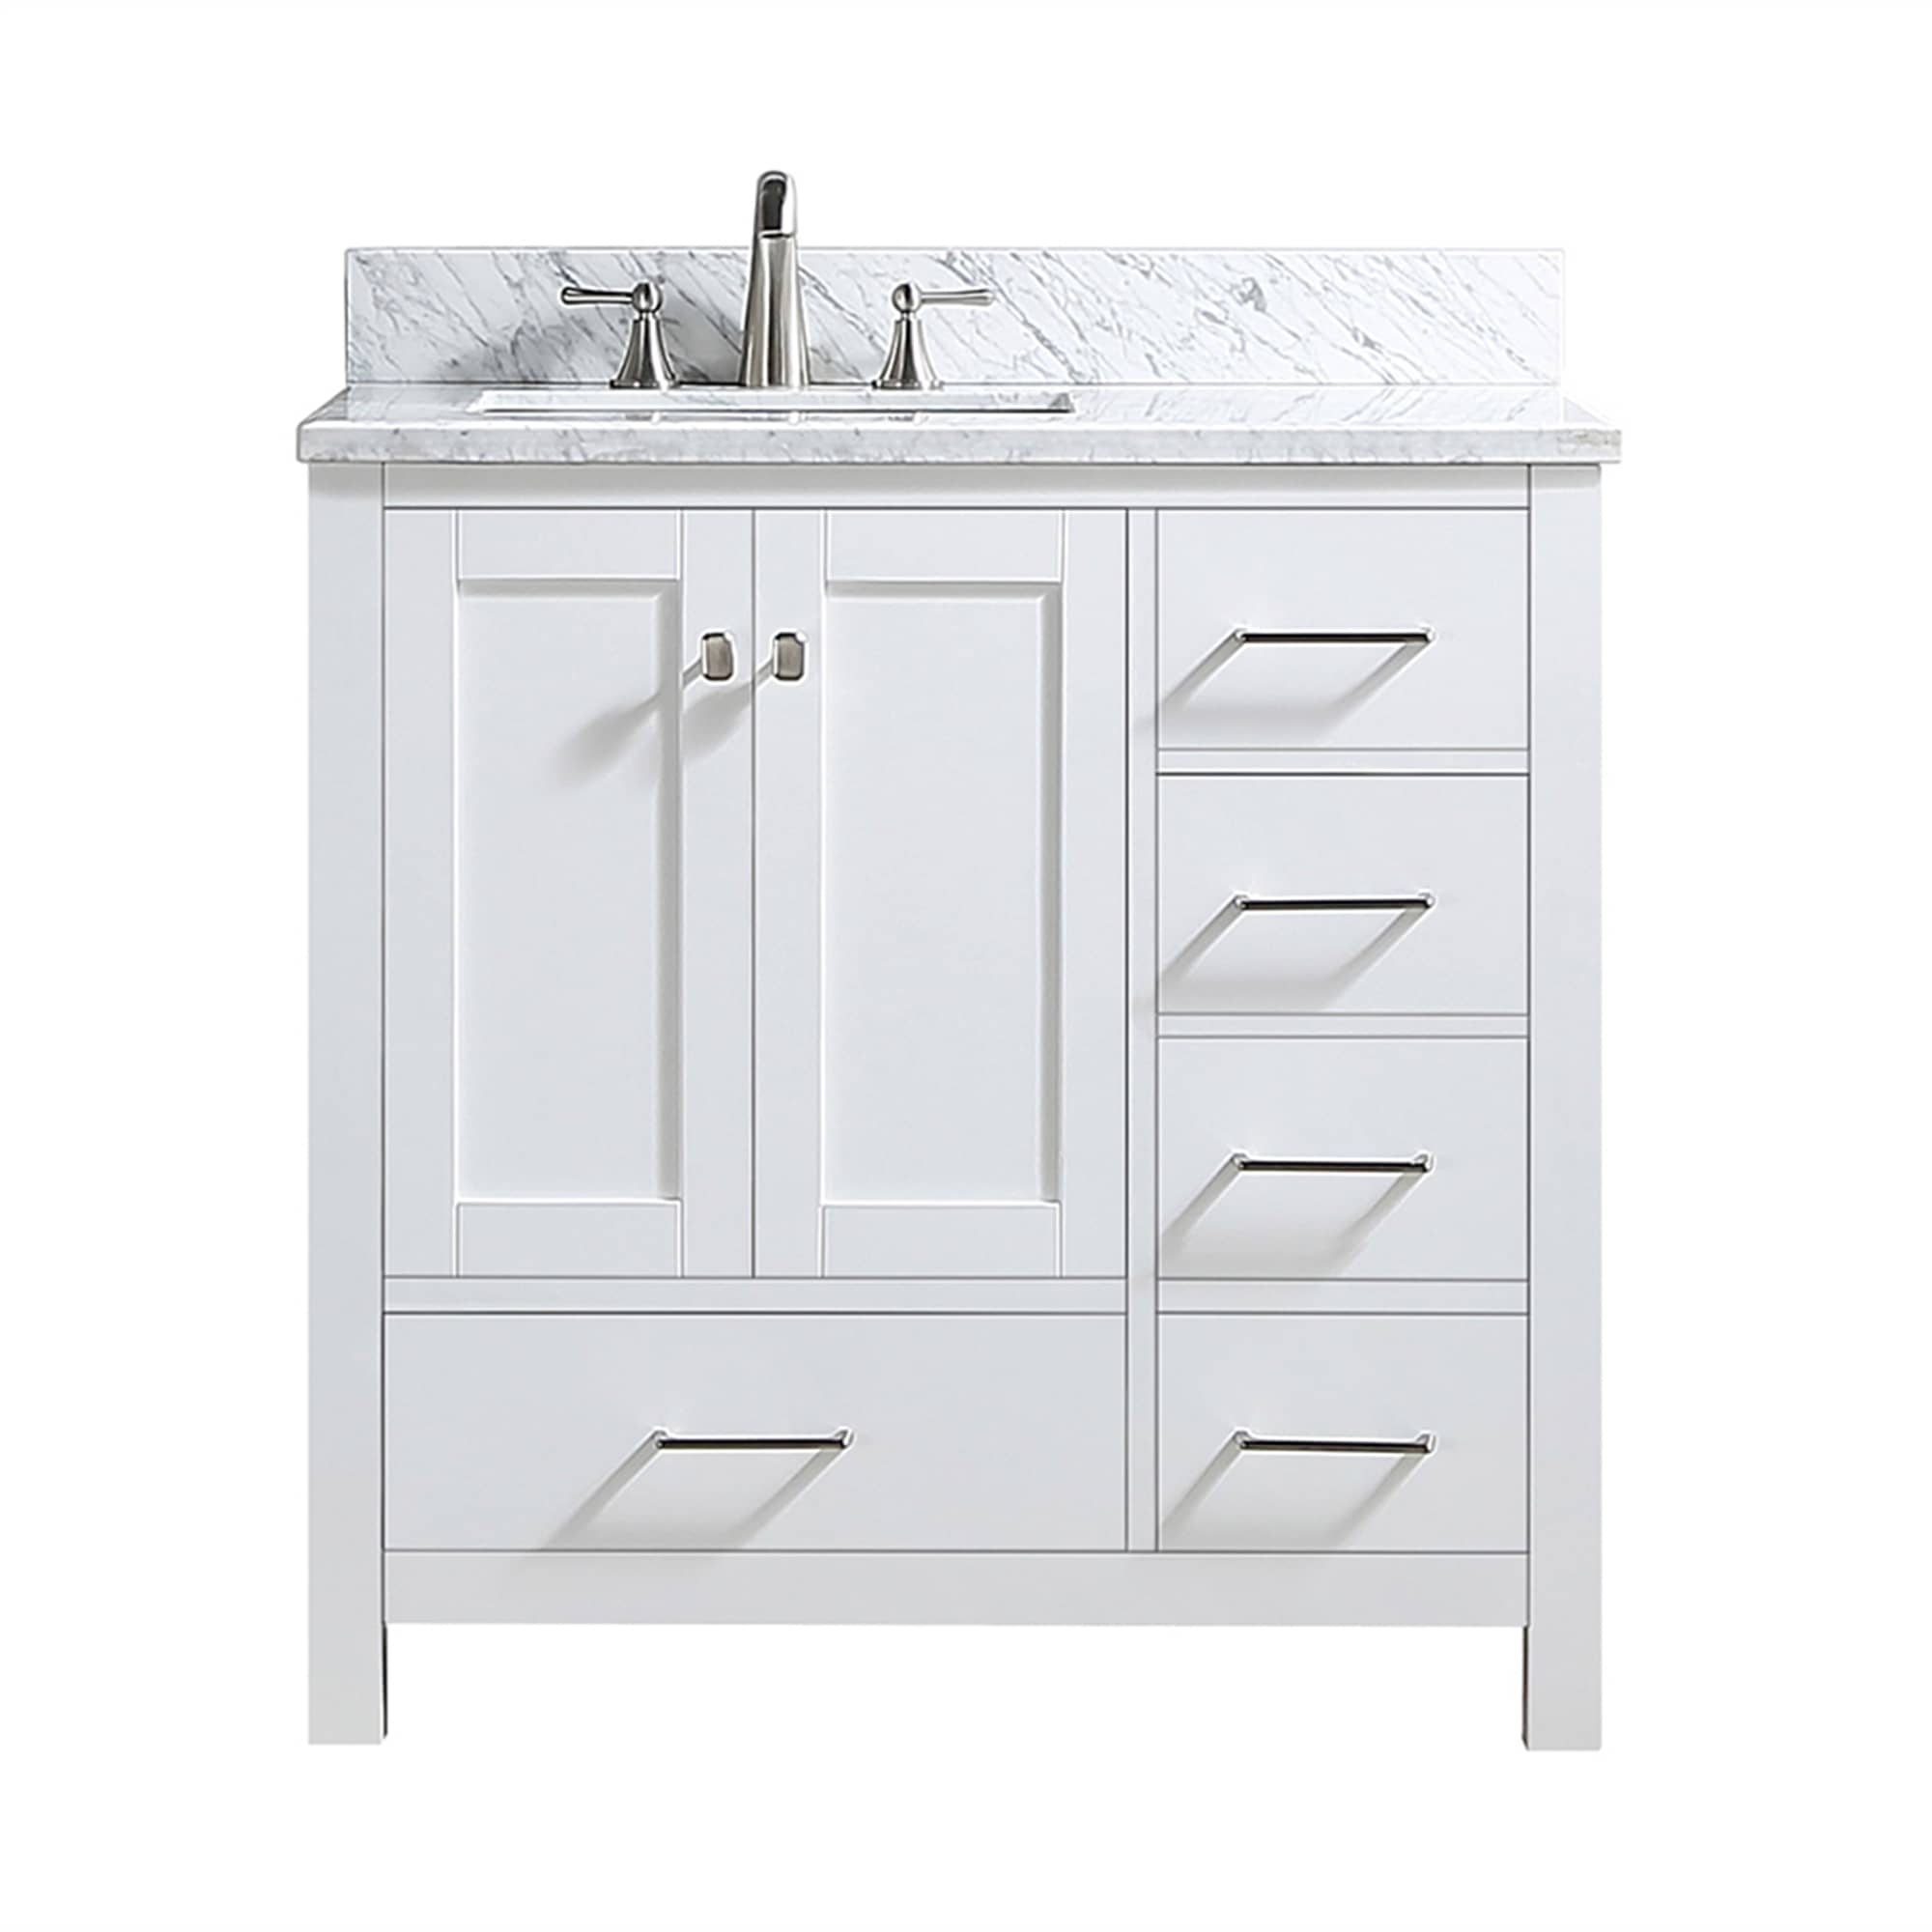 CASAINC 36 Inch Bath Vanity in White with White Top and Basin ( 36W x 22D x 35.4 "H )-Casainc Canada